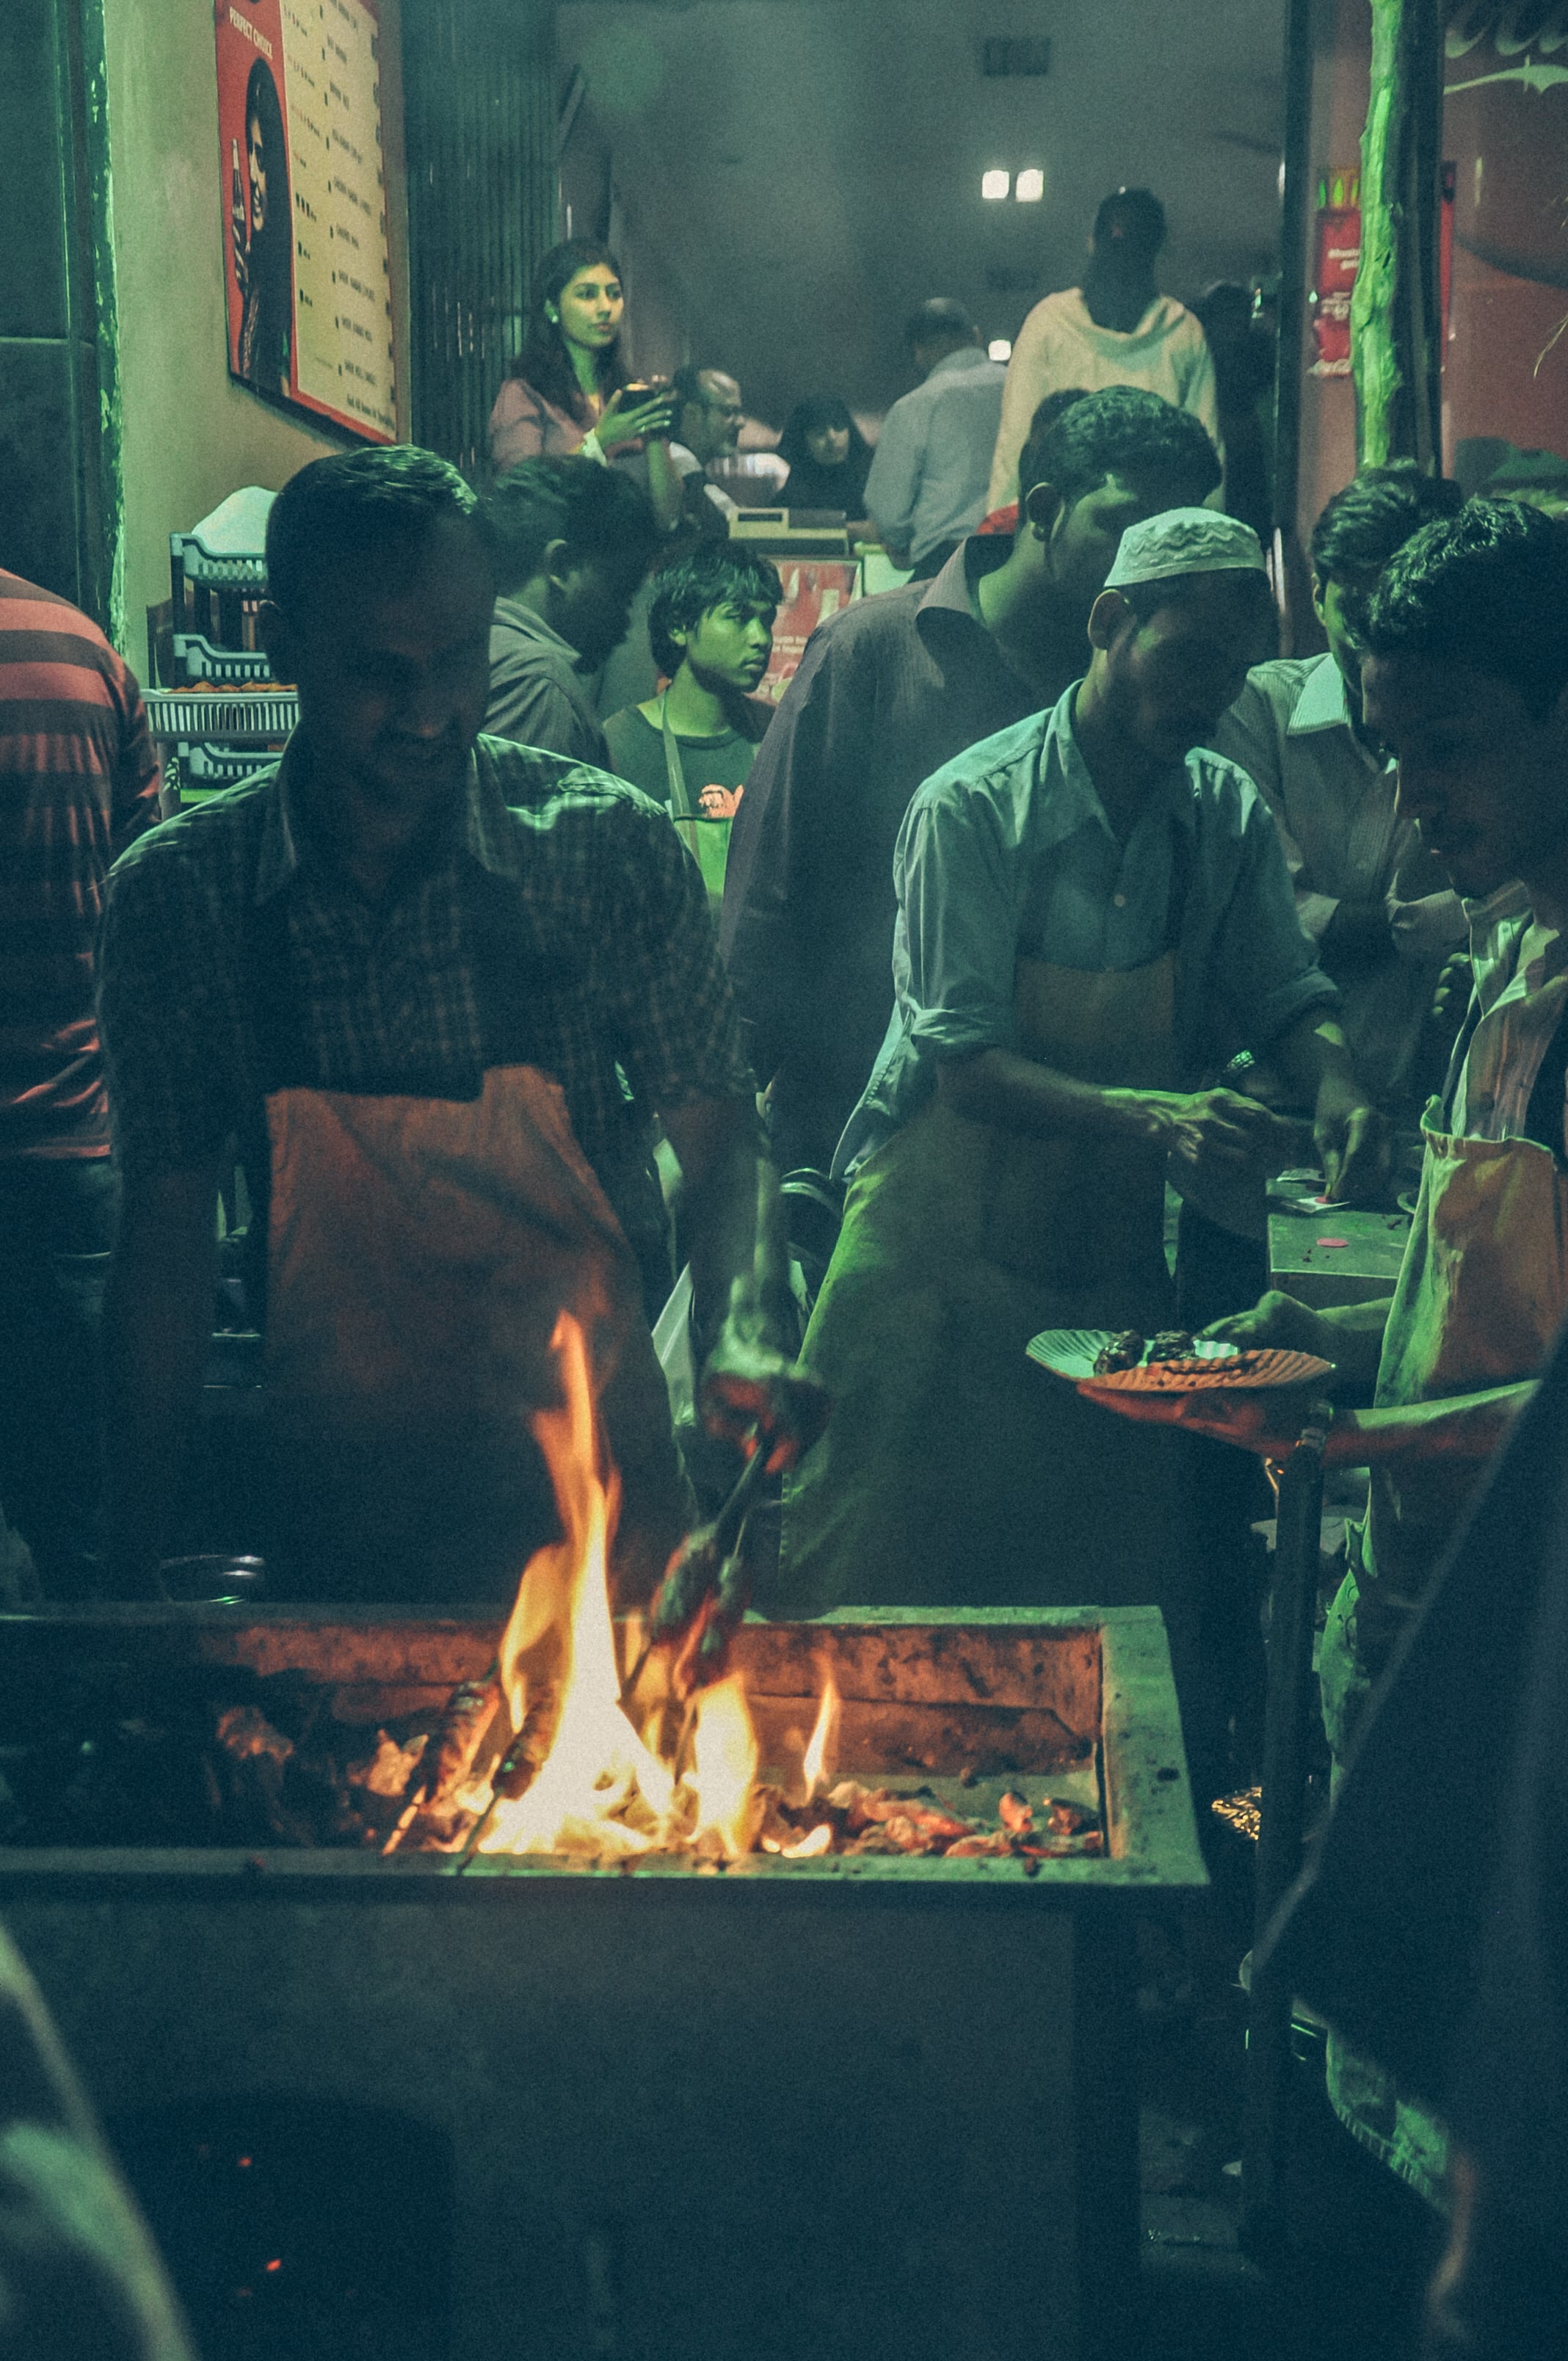  Street food will always have its way of using flavours, and affordability to dull any bias. 